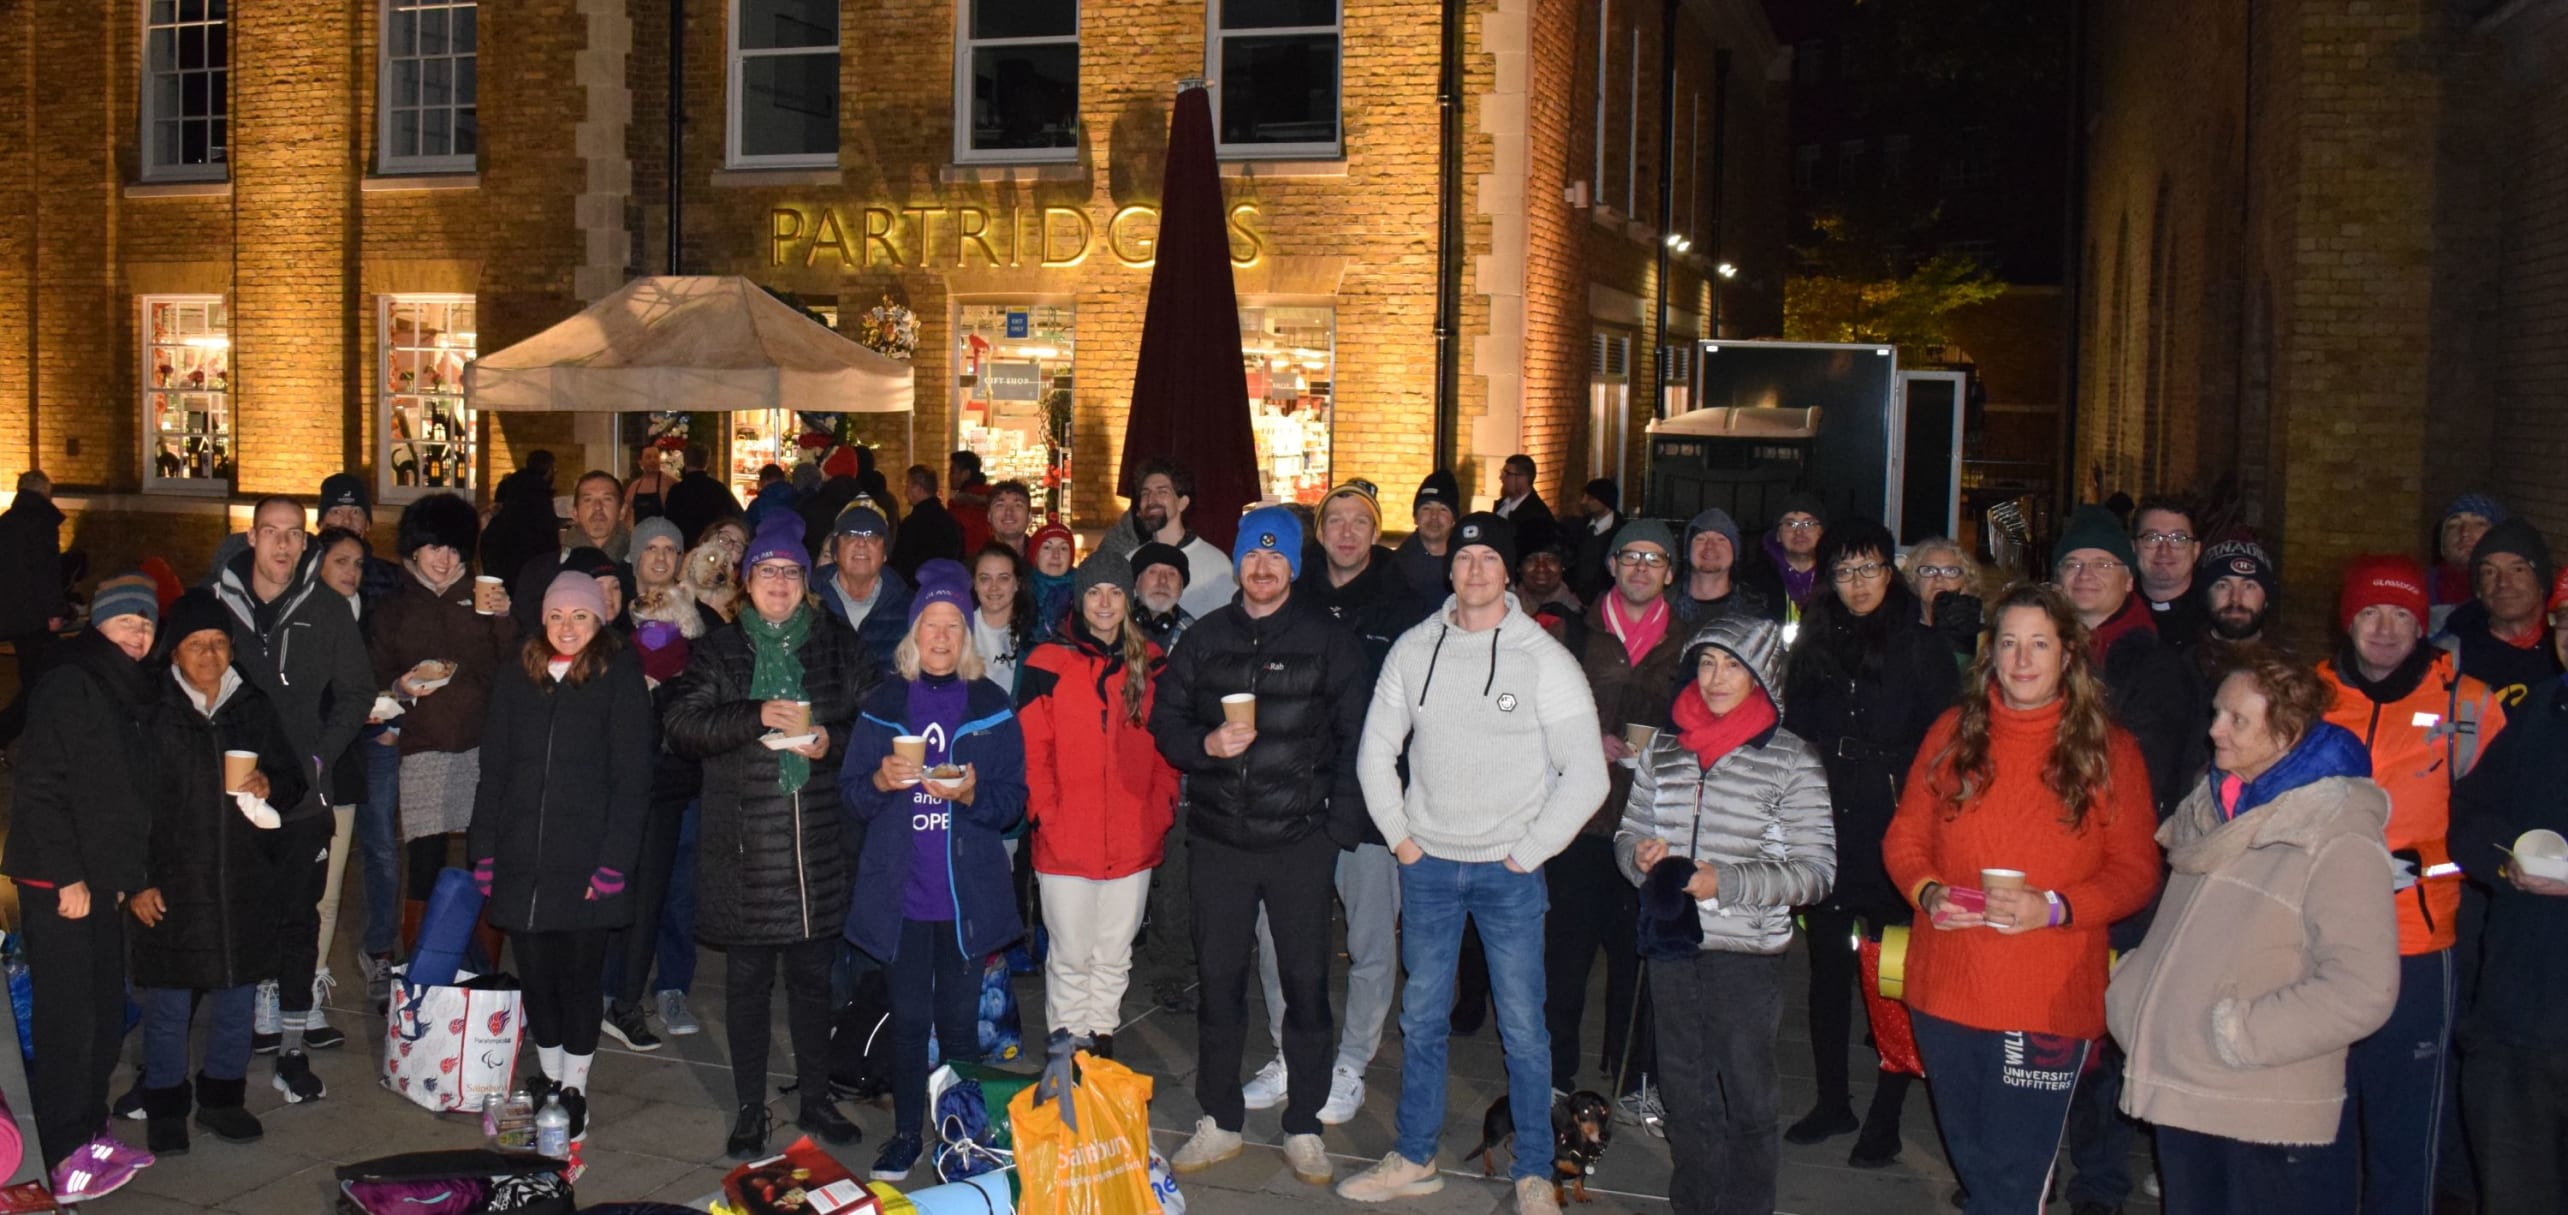 All the sleepers from the 2022 Sleep Out standing in front of Partridges